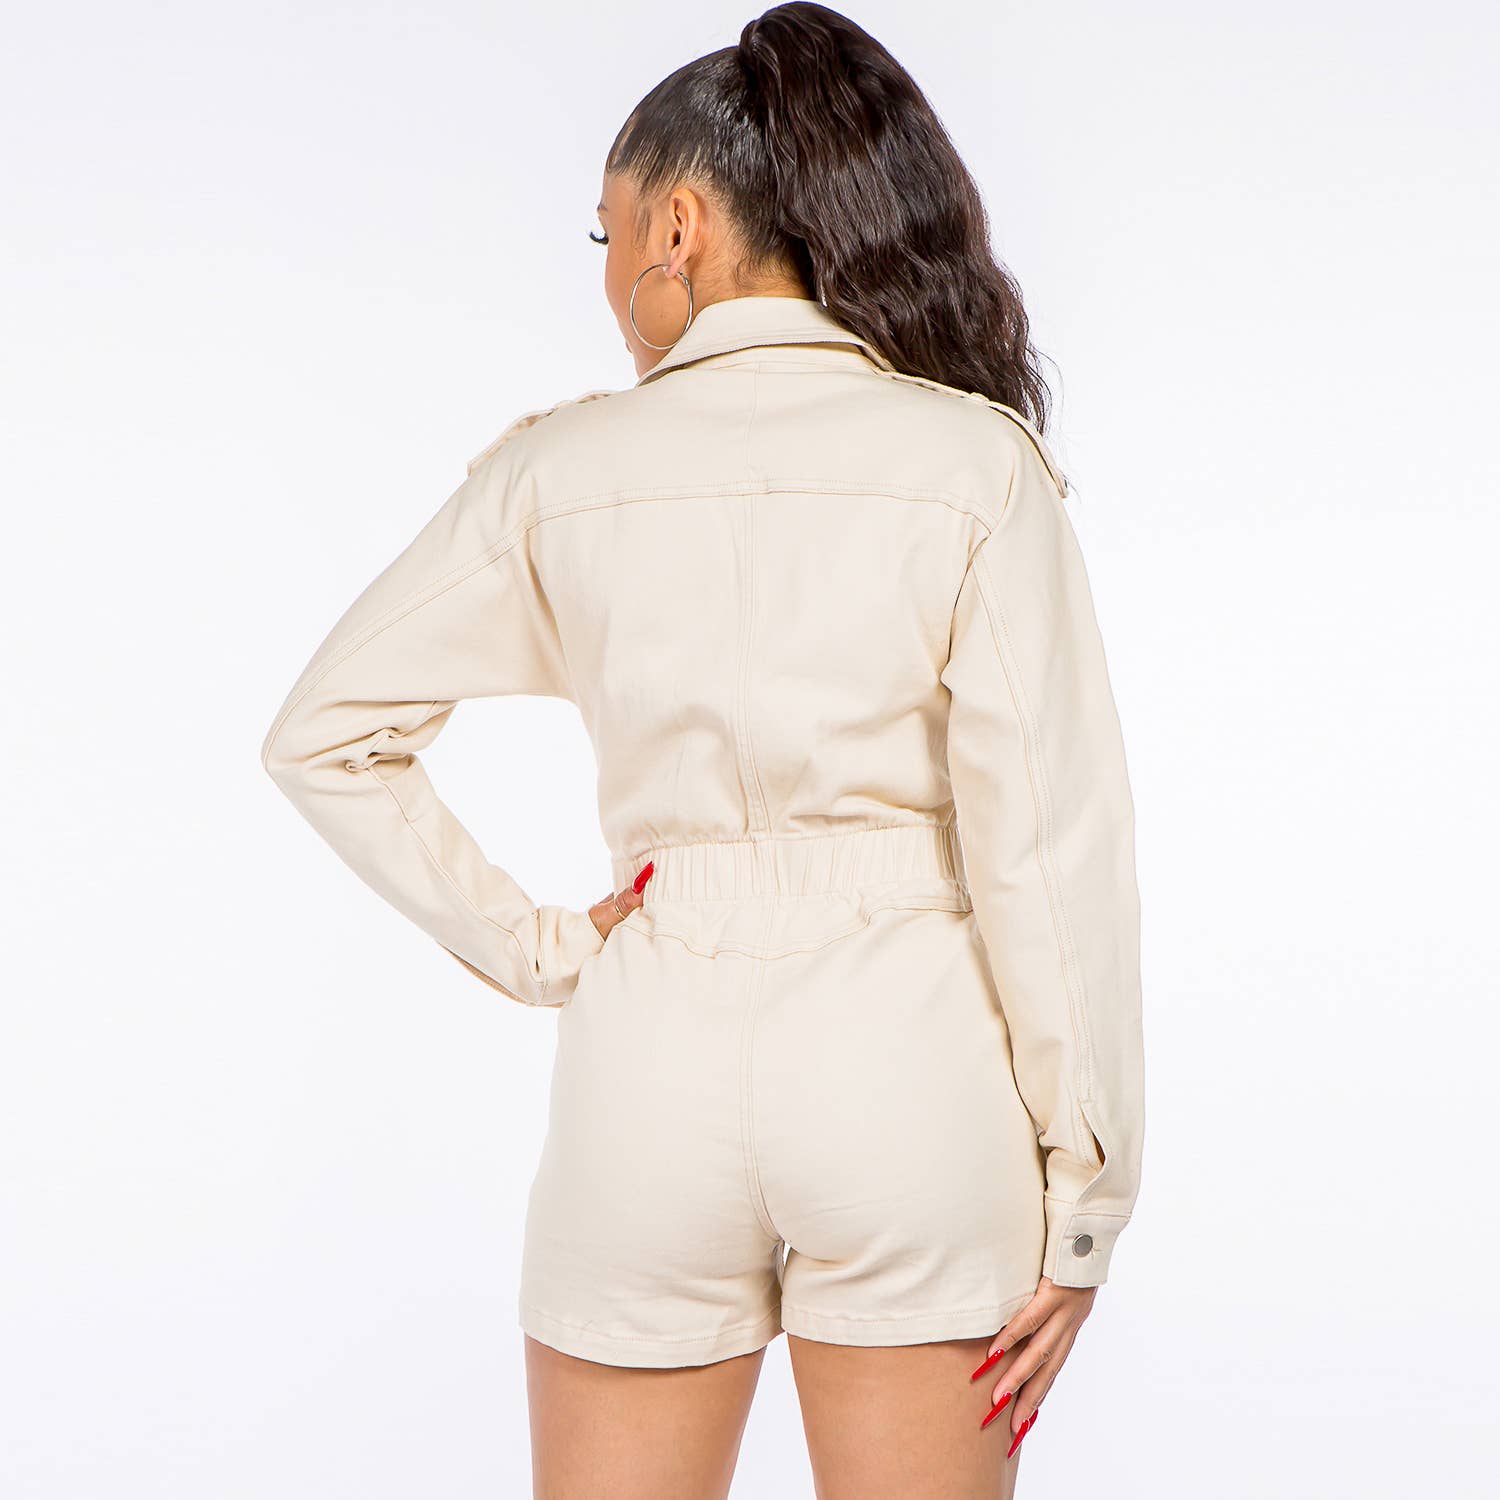 Wholesale PLUS SIZE UTILITY POCKETS LONG SLEEVE ROMPERS-AJR30342P 